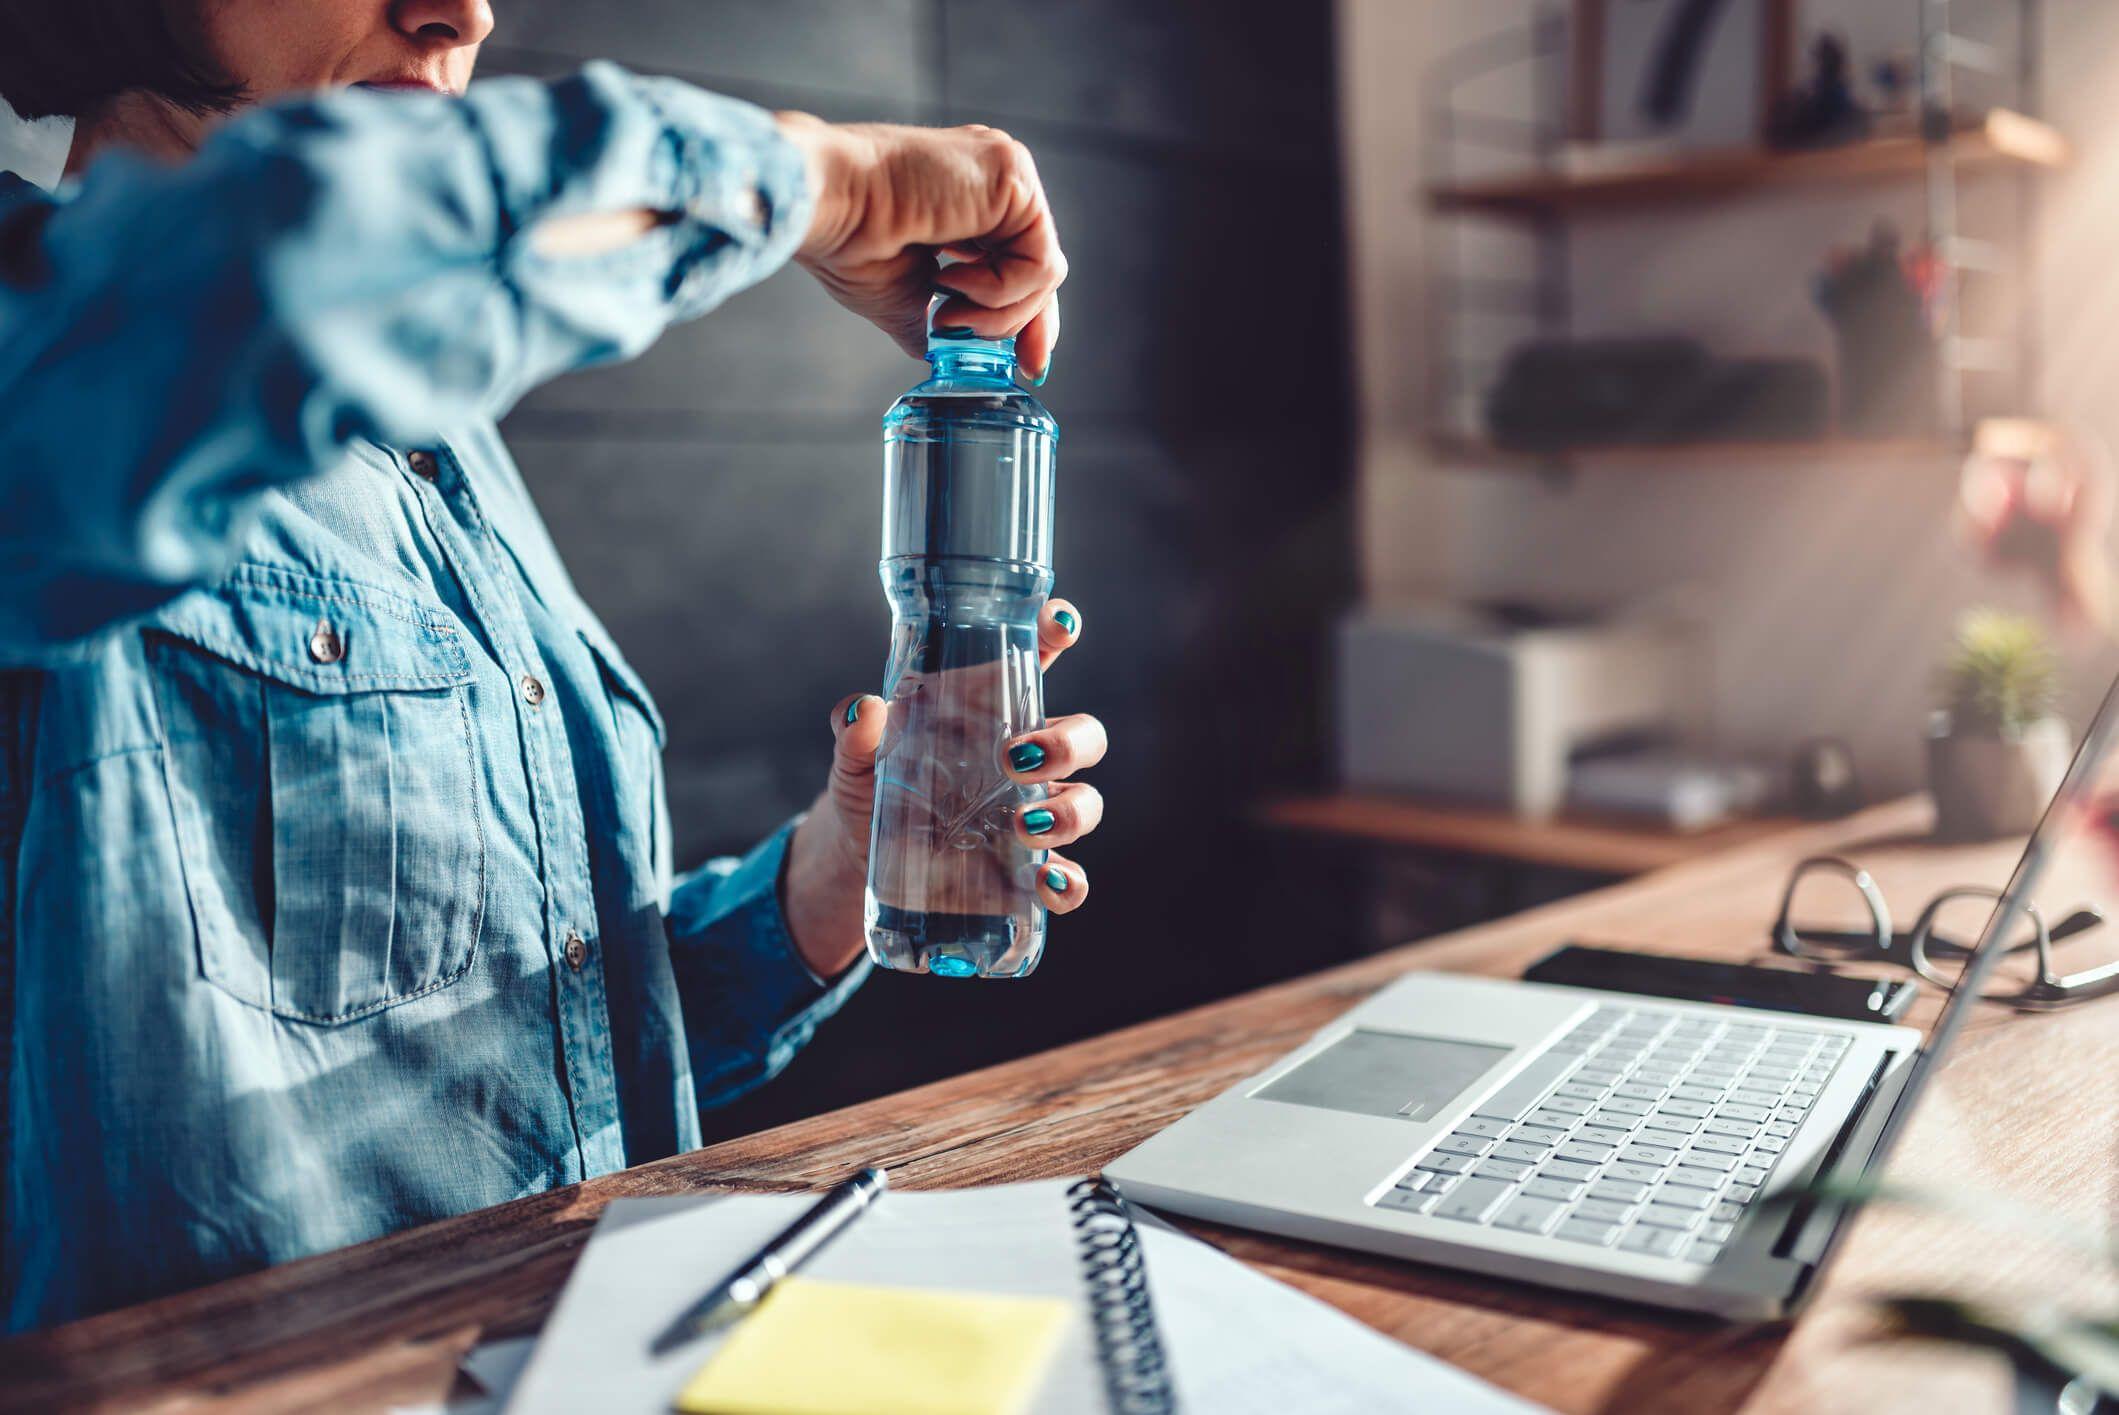 Person opening a water bottle in front of laptop